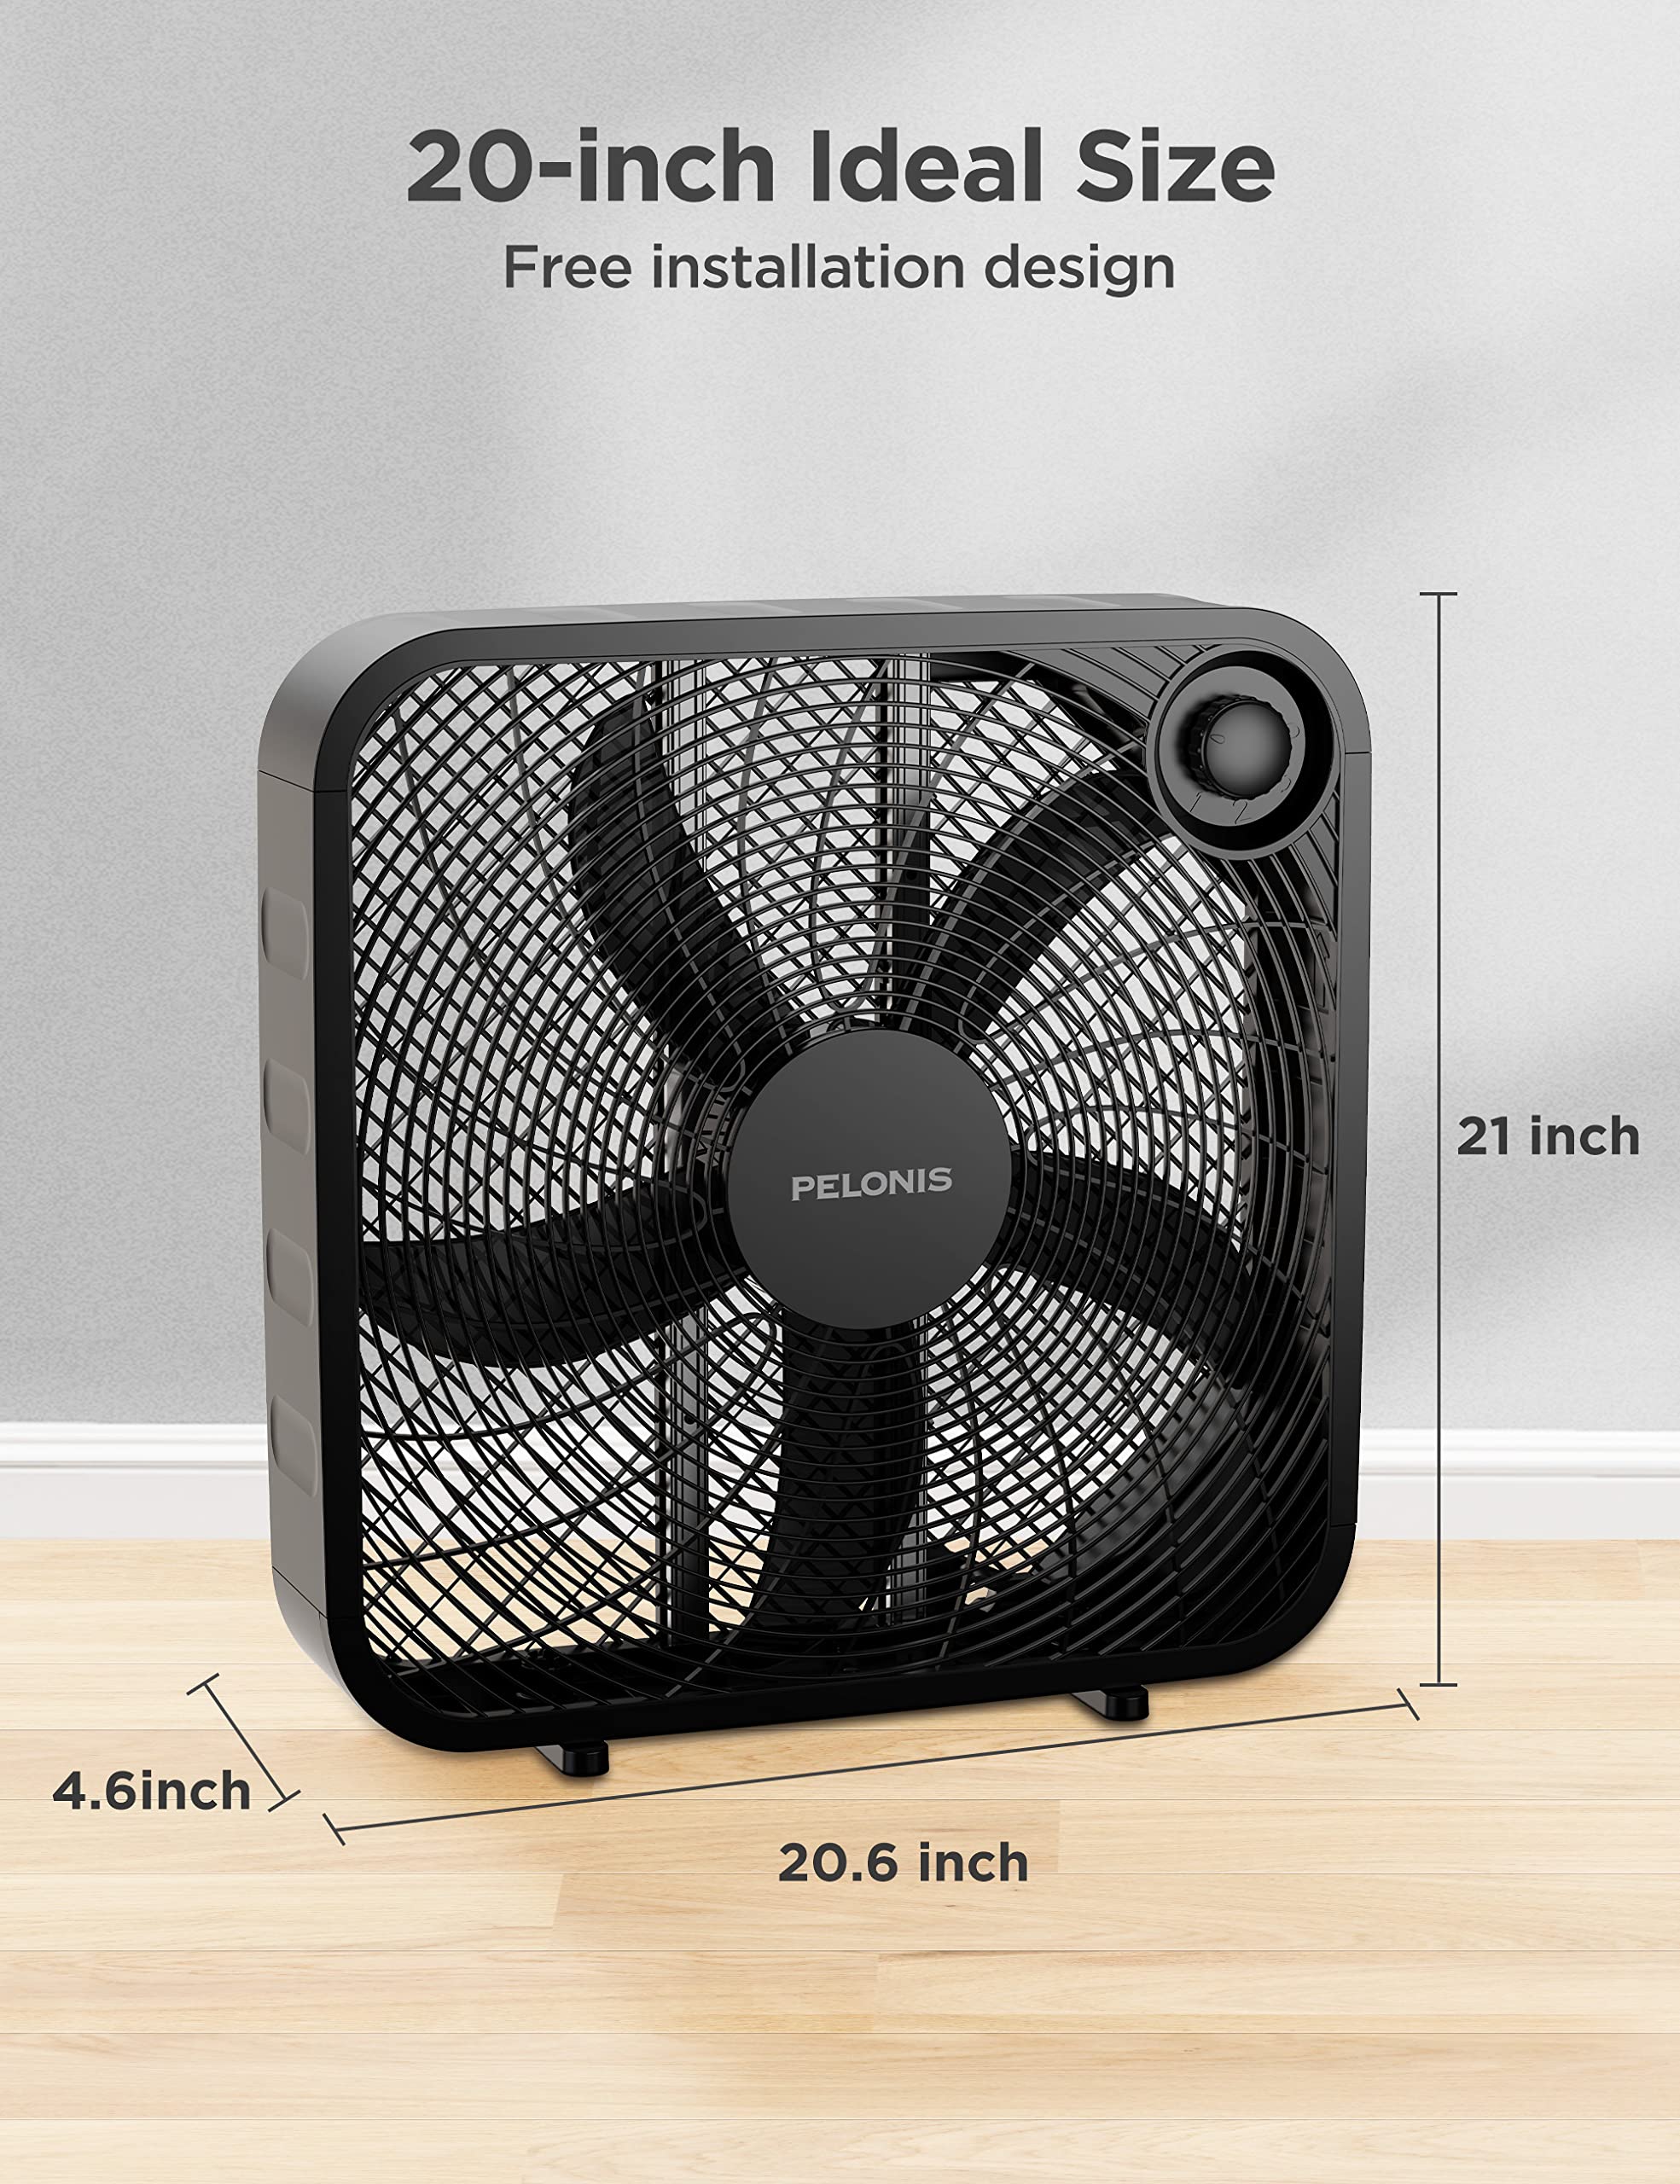 PELONIS 3-Speed Box Fan For Full-Force Circulation With Air Conditioner, Upgrade Floor Fan, Black